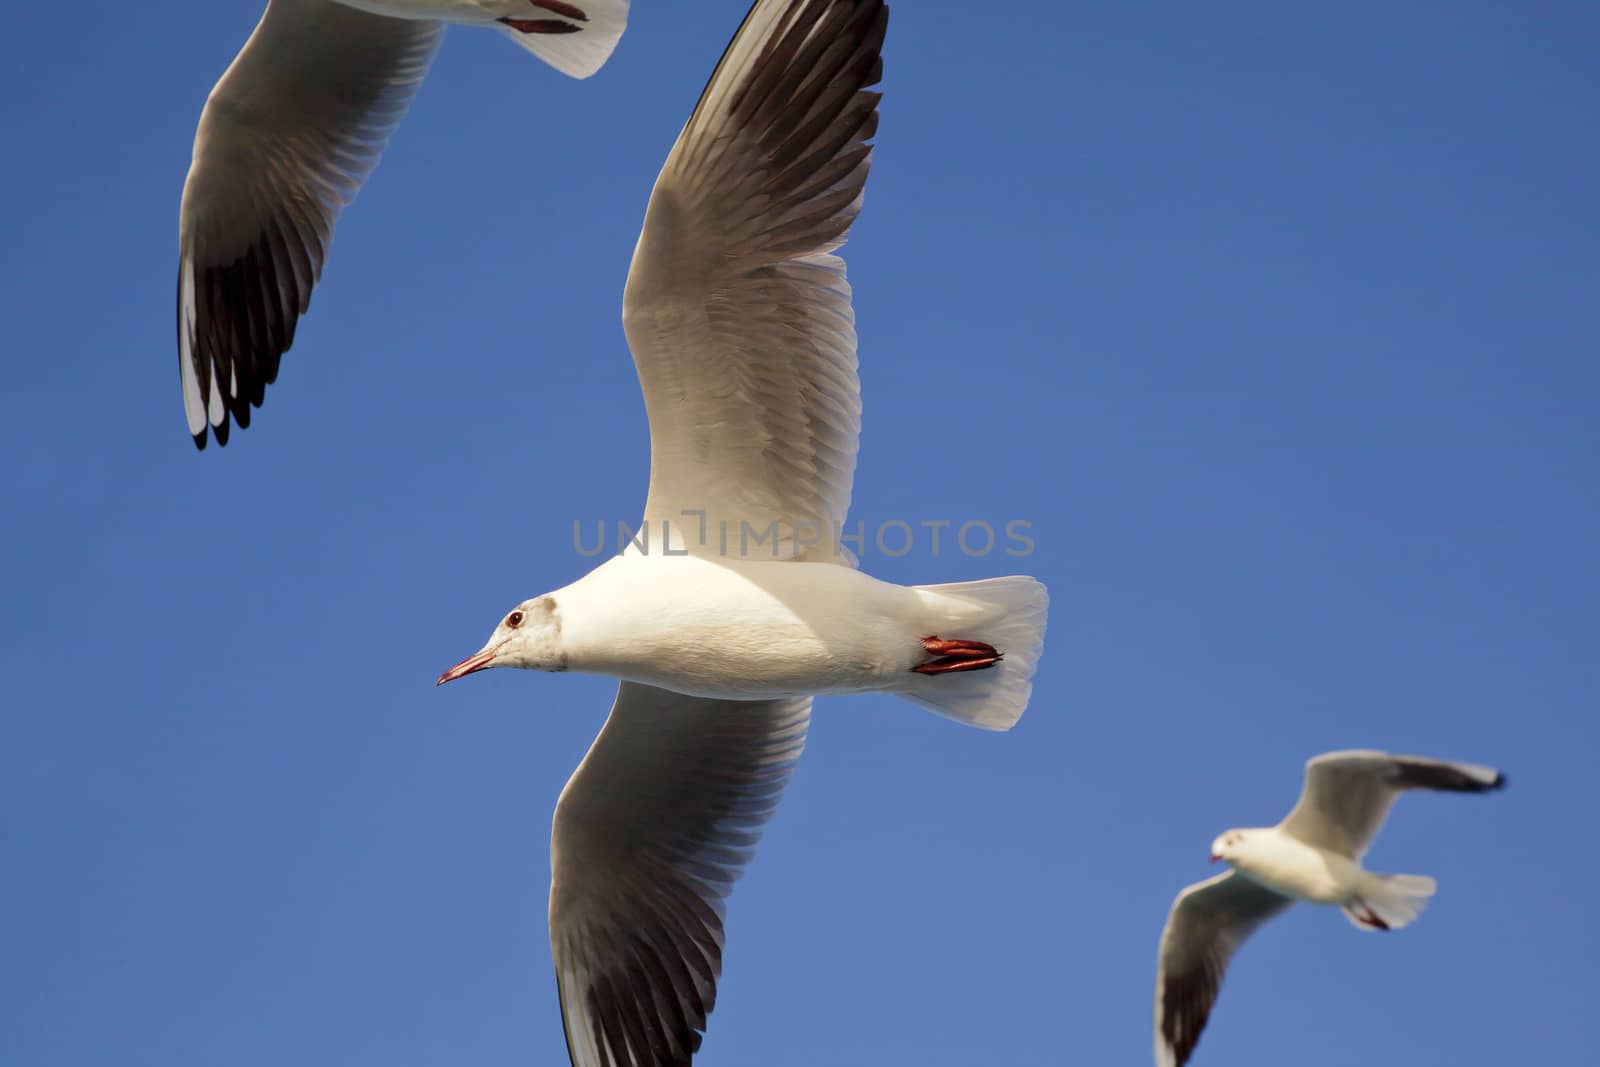 Horizontal landscape generic color capture three seagulls in flight shot from below. Shot taken at Bet Dwarka, Gujarat, India and is a close cropped image